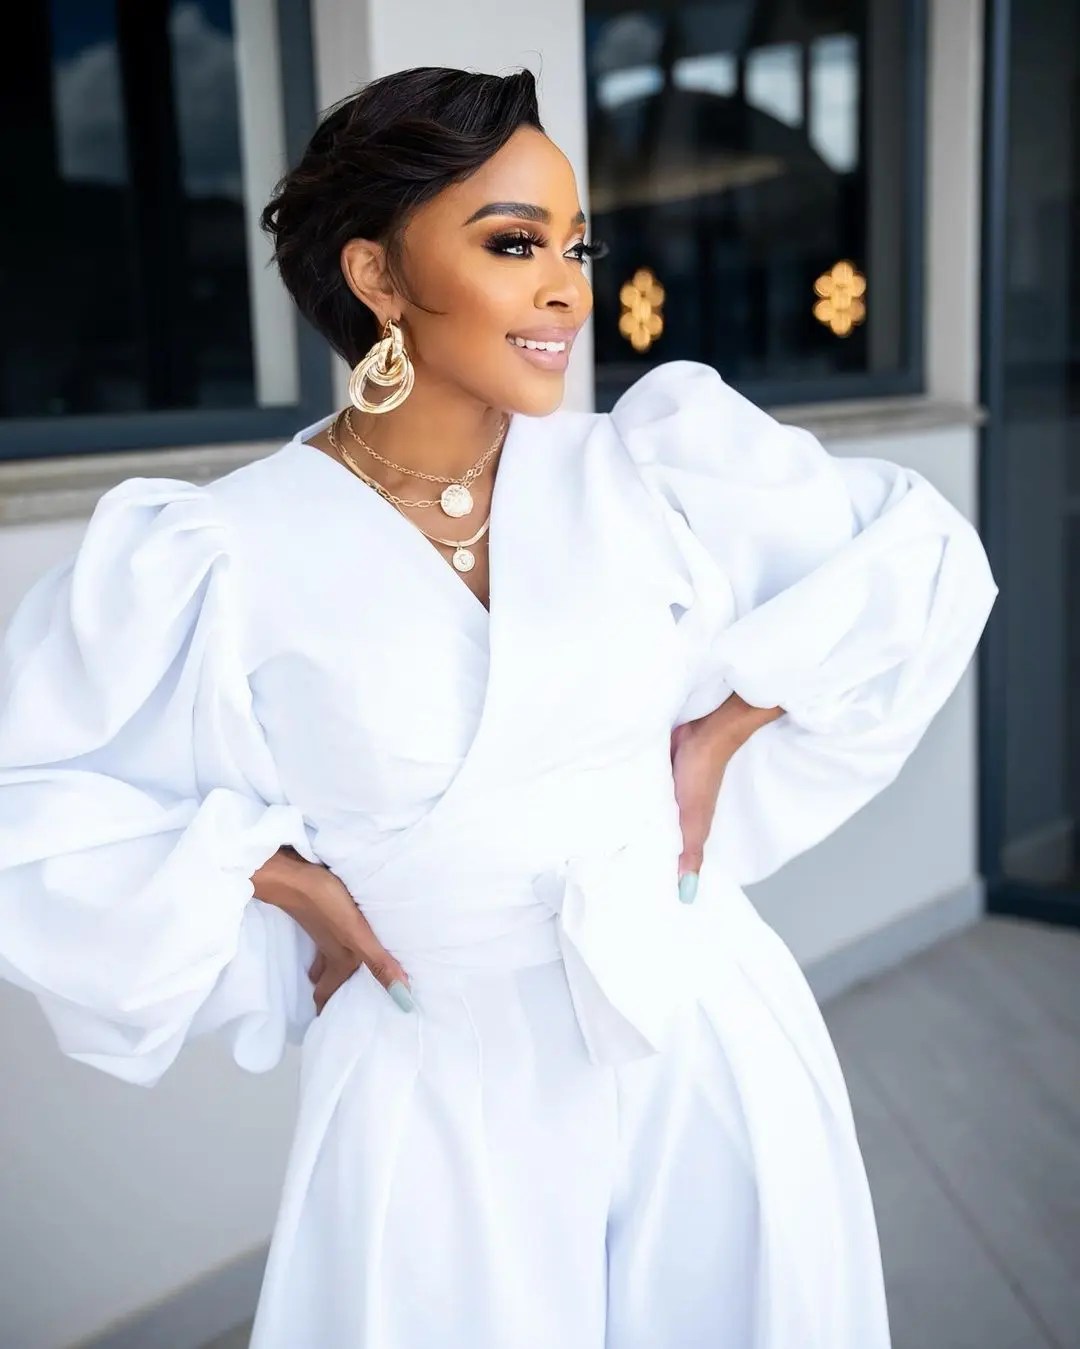 Congratulatory messages shower in for actress Thembi Seete